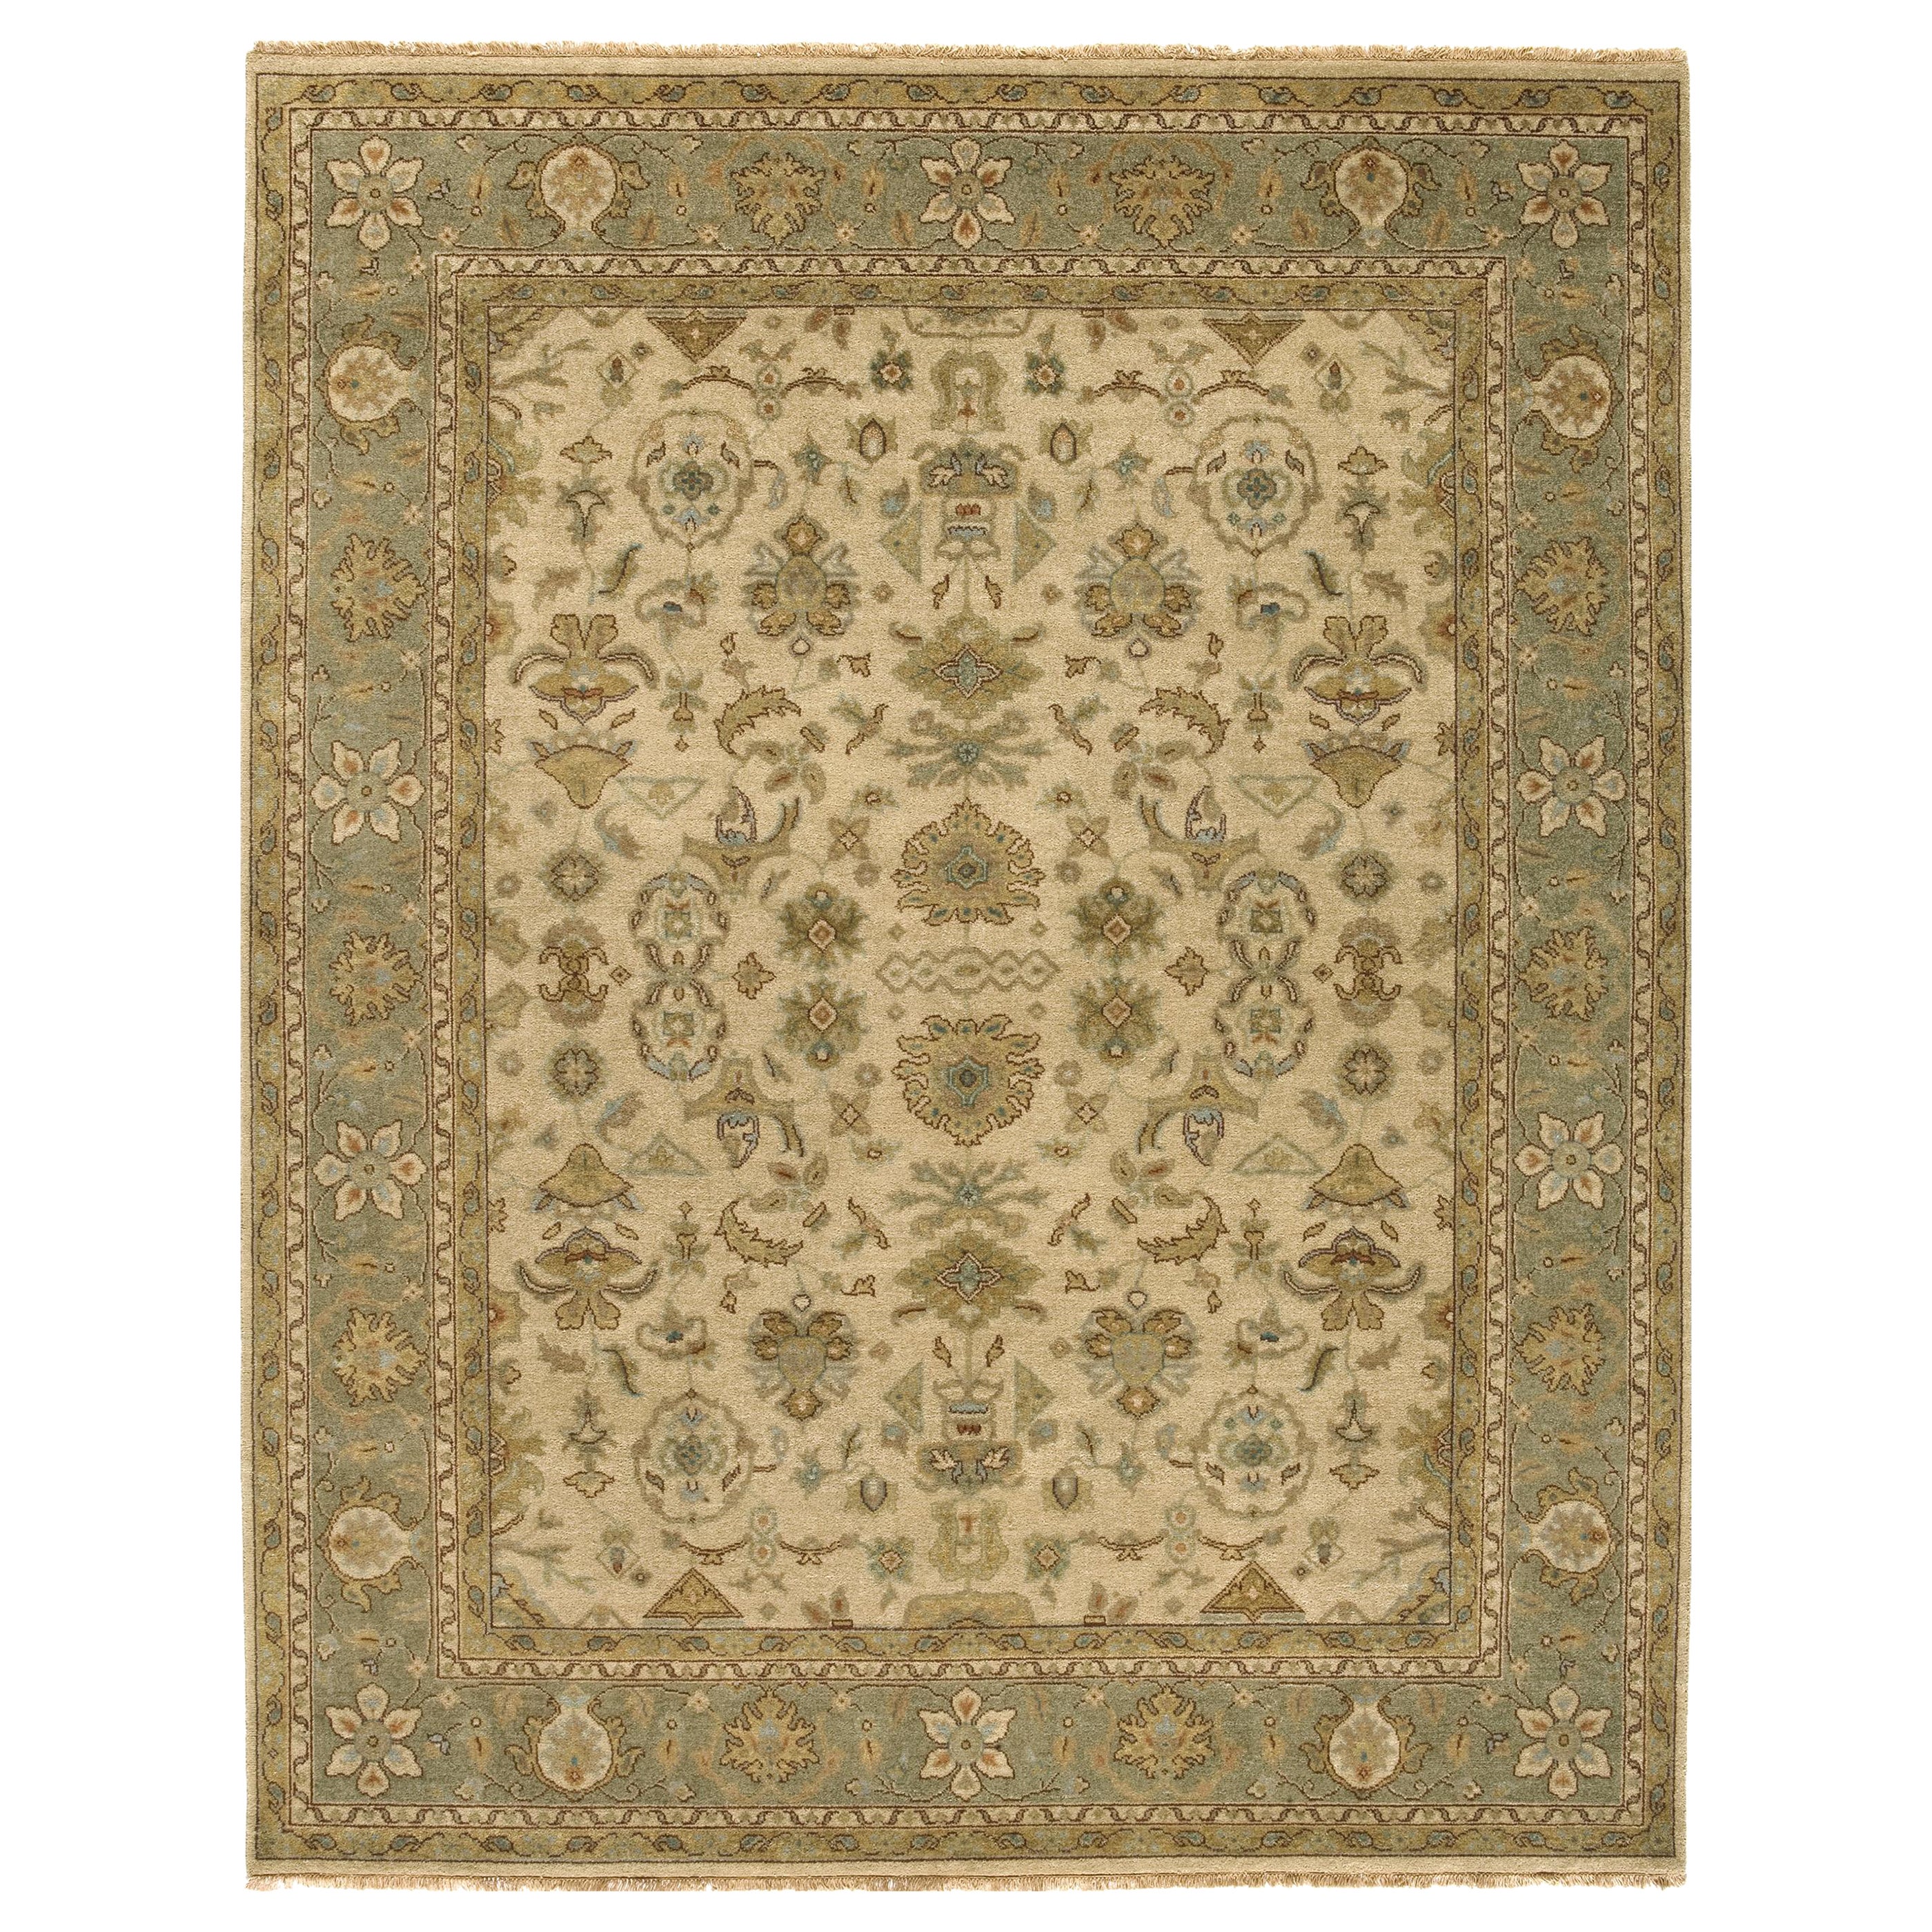 Luxury Traditional Hand-Knotted Mahal Beige & Light Green 12x22 Rug